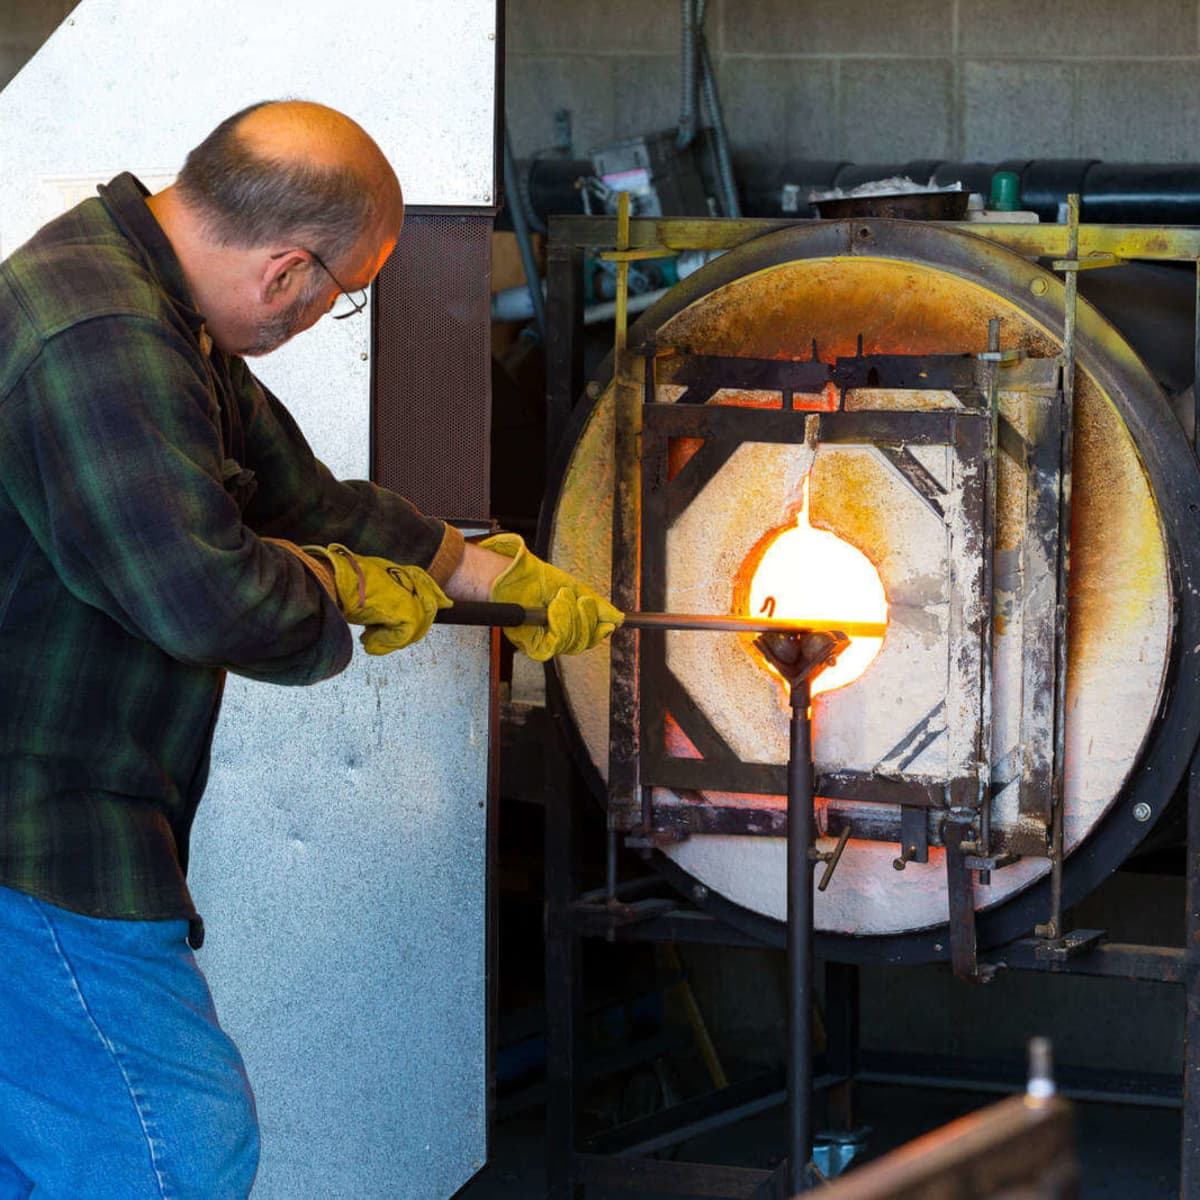 A History of Glassmaking and Blowing Throughout the Ages - FeltMagnet